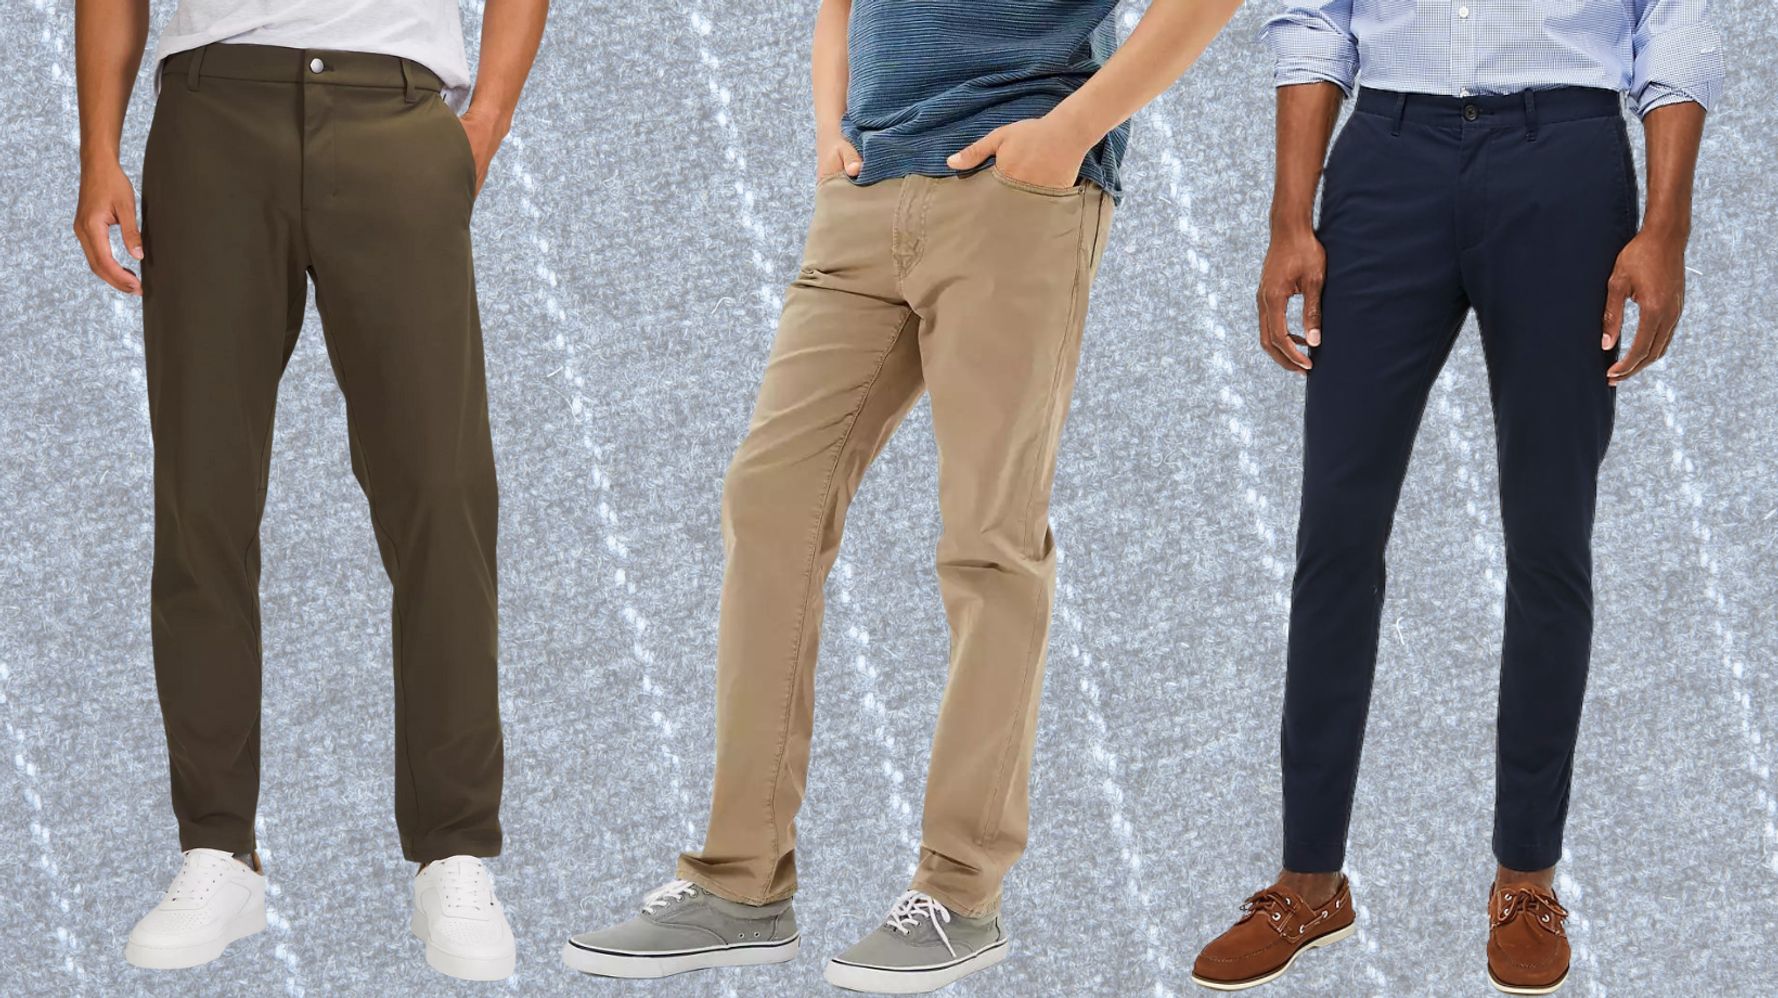 Phenomenal': The top-selling joggers  shoppers love are down to as  low as $12 (that's 50% off)